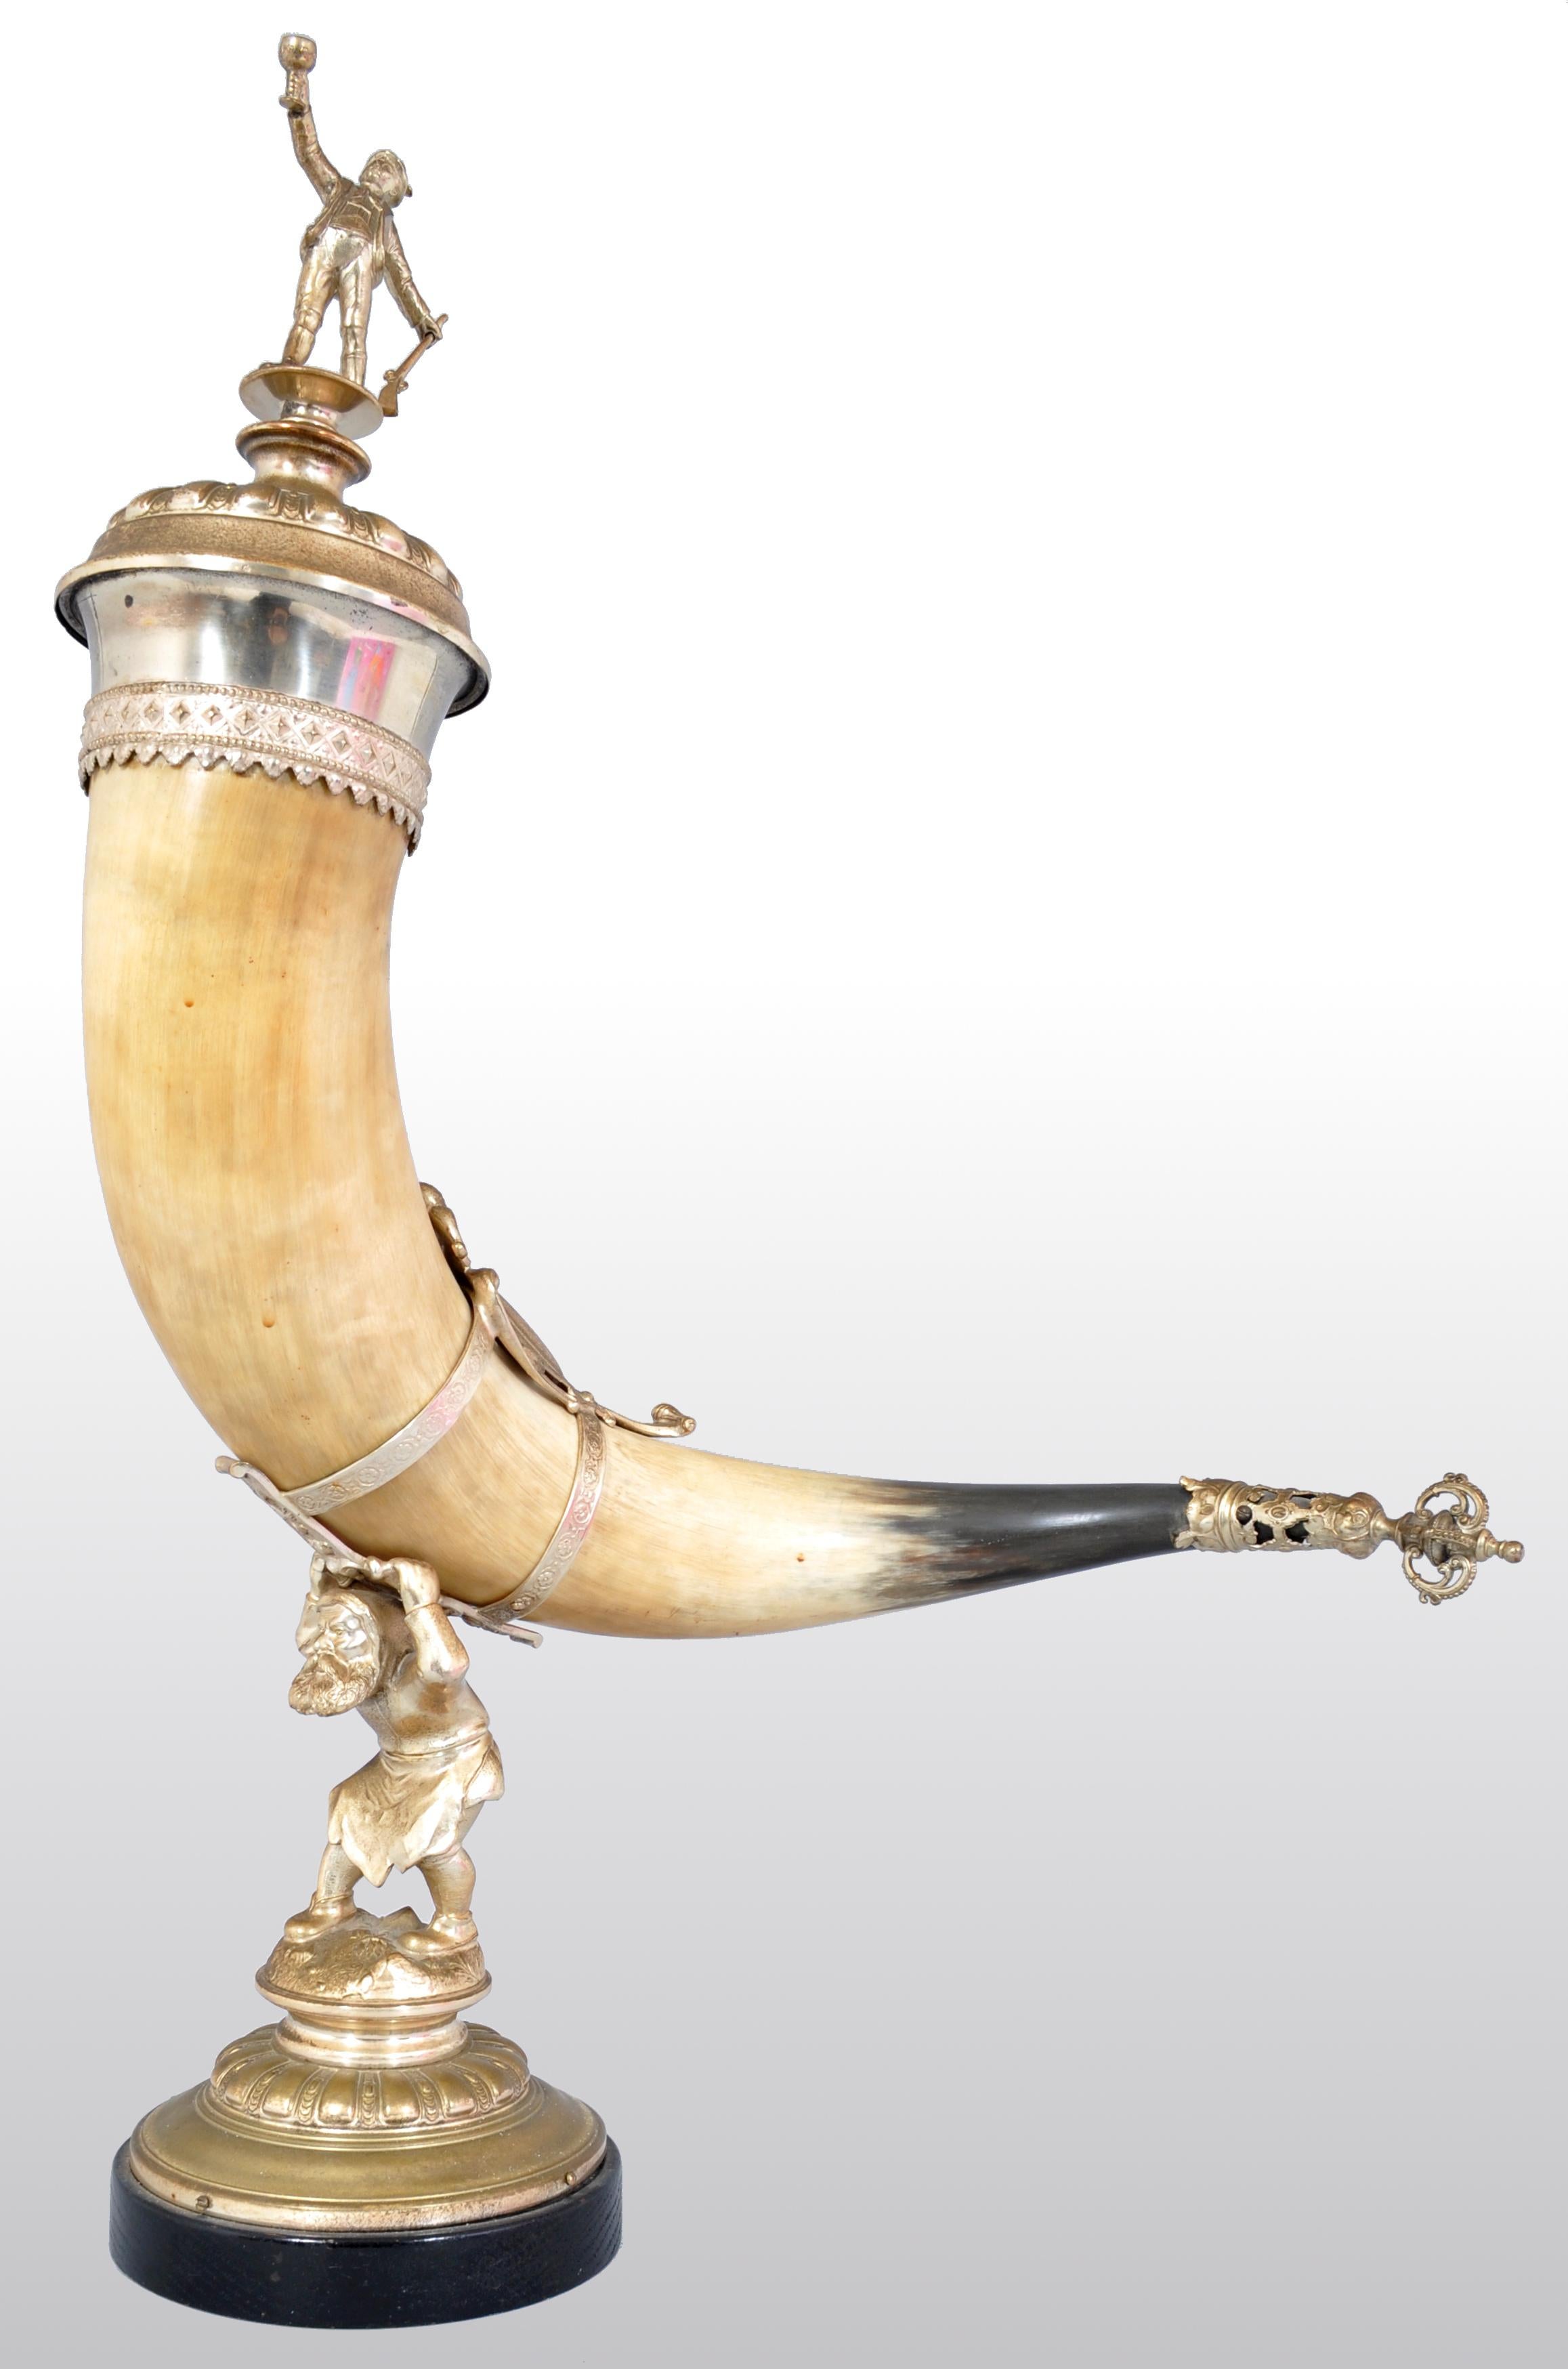 Antique Austrian gilded bronze hunting horn/cornucopia, circa 1880. The horn having an Austrian Gentleman finial depicting the hunter with his rifle and raising his glass aloft. The horn standing on a base cast as a fairy tale gnome, the end of the